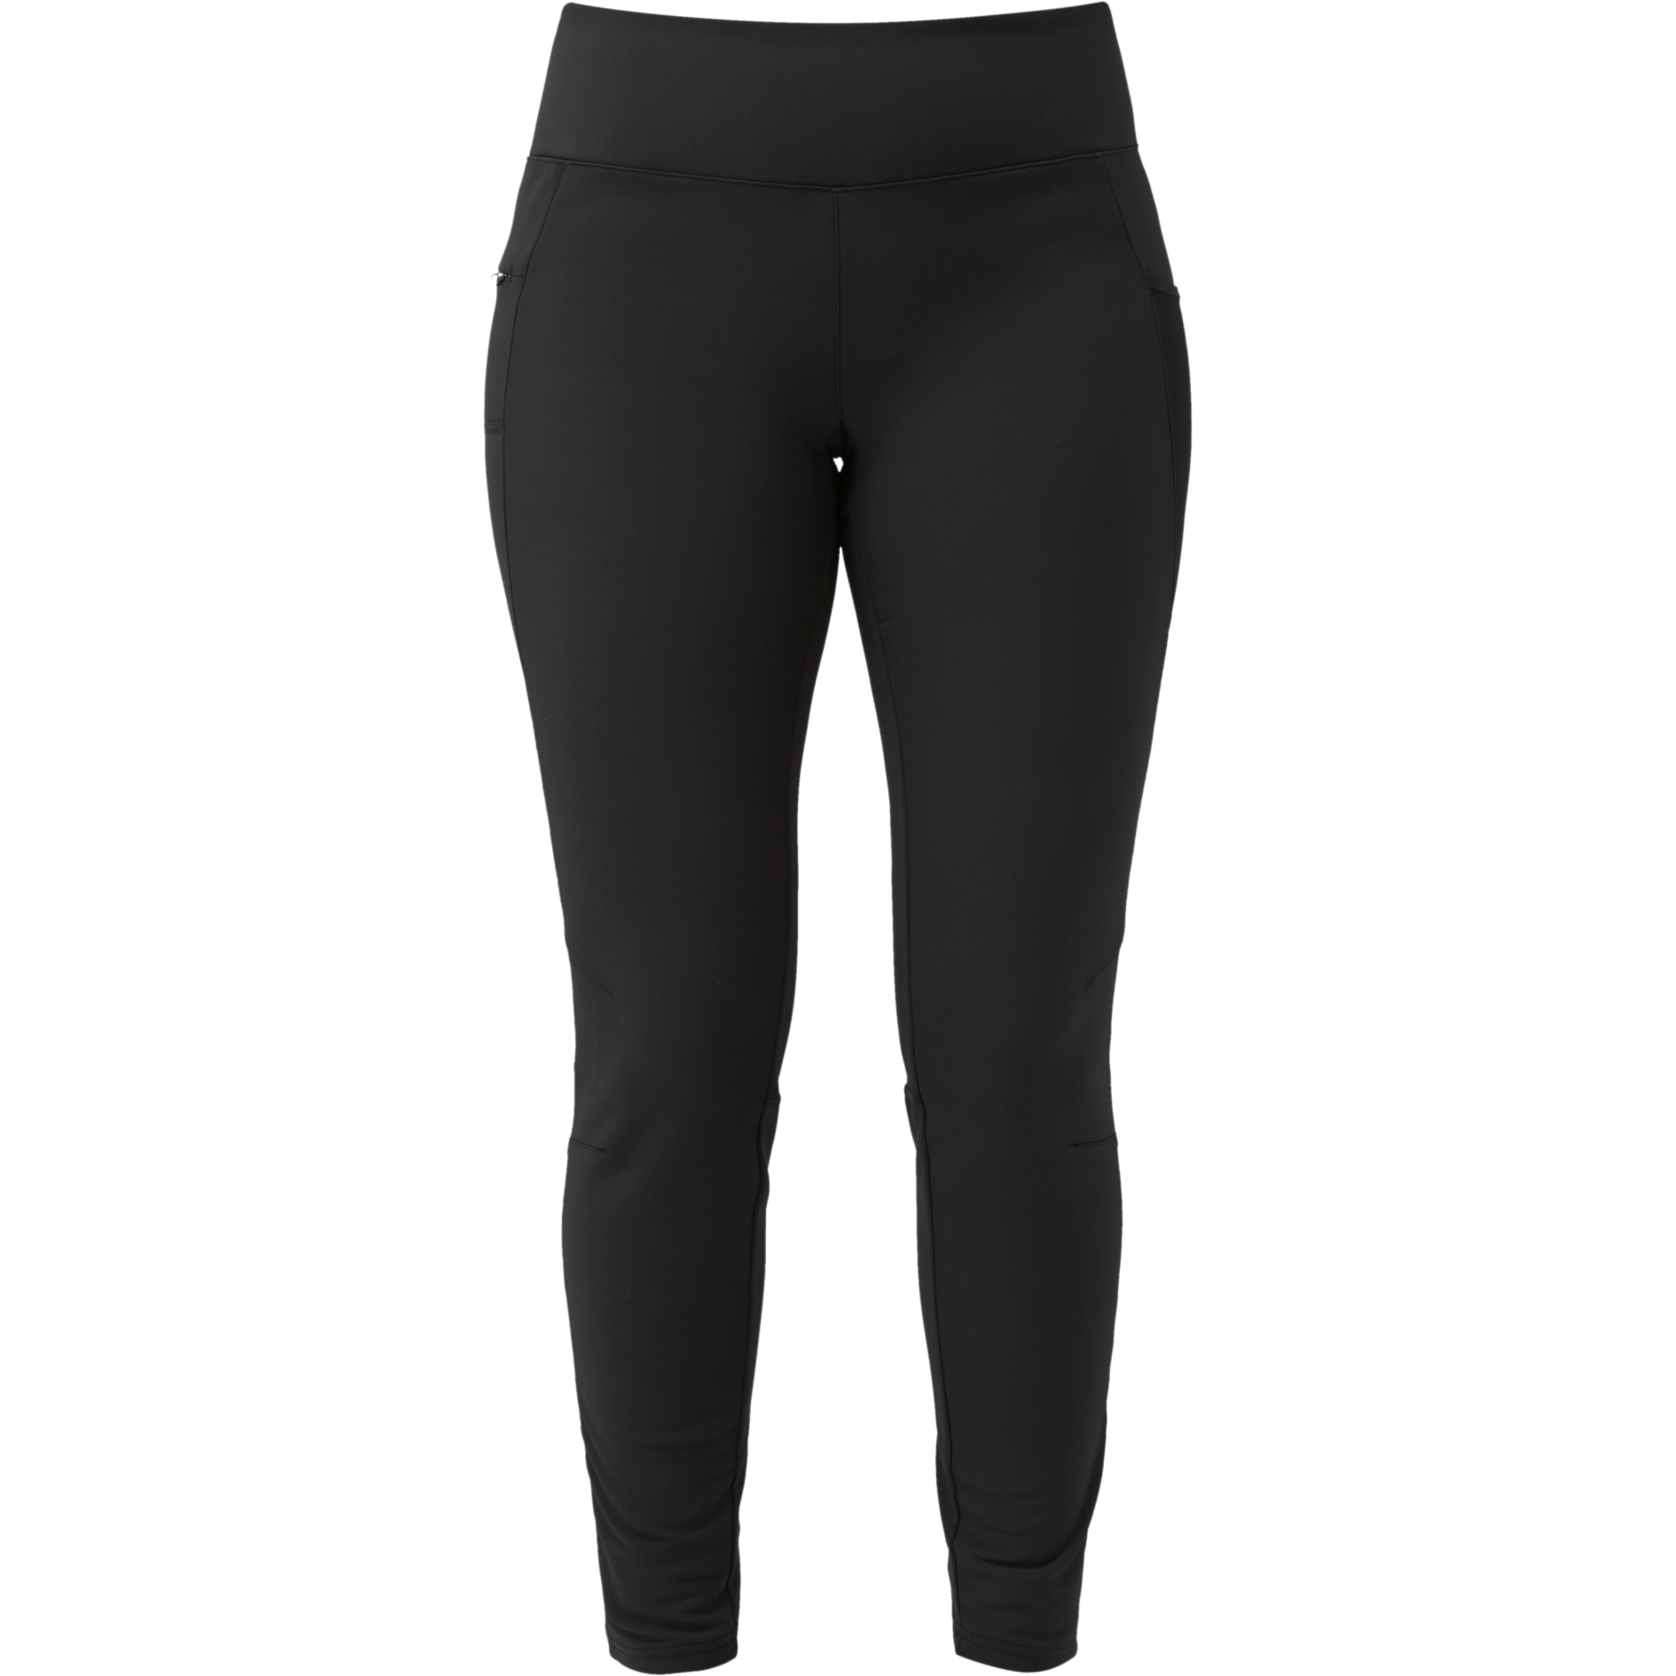 Image of Mountain Equipment Sonica Women's Tight ME-004196 - black